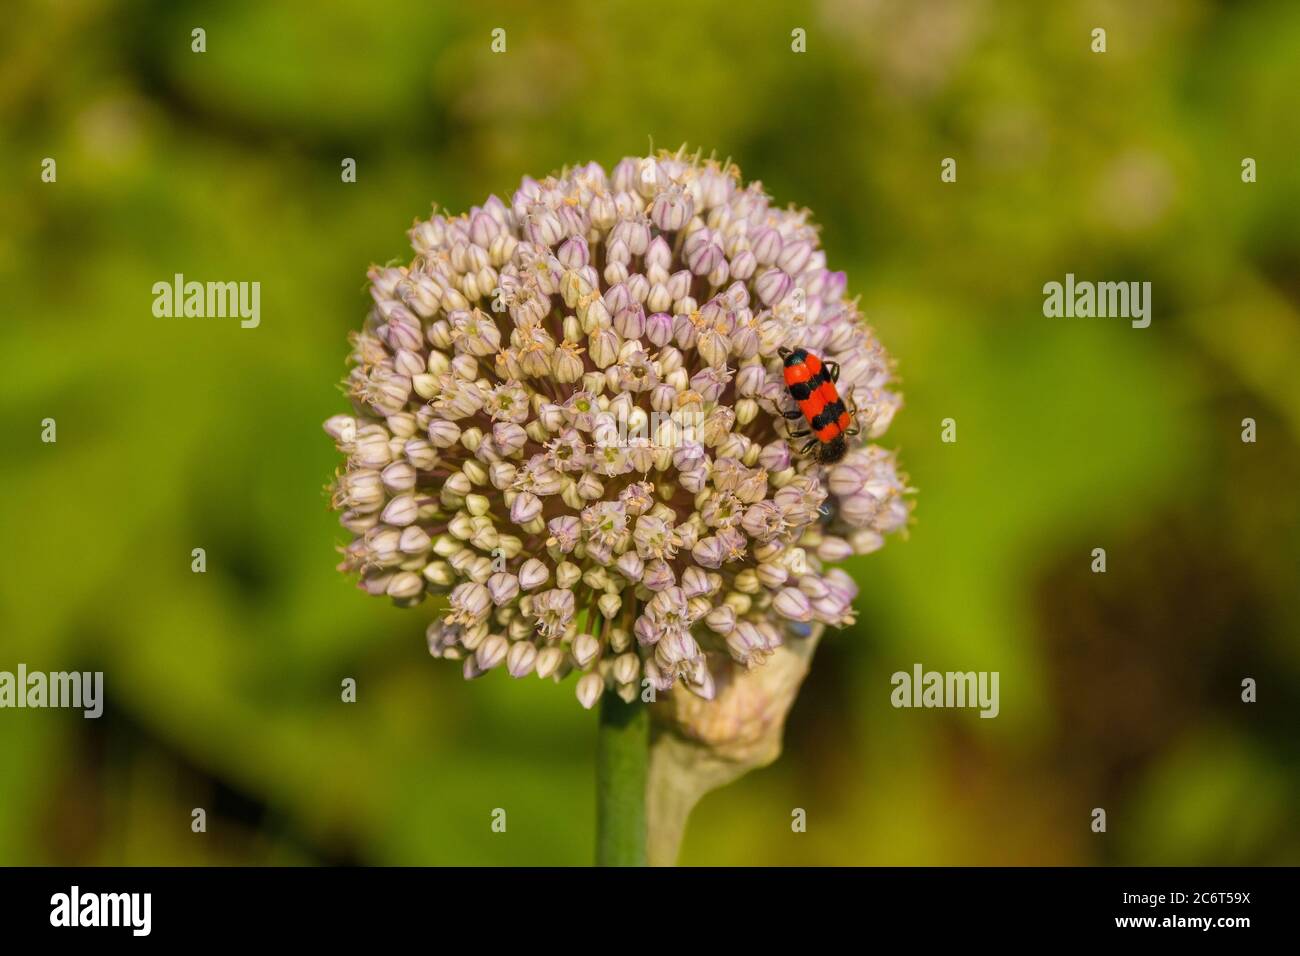 A Trichodes Apiarius beetle from the Cleridae, Clerinae family on an ornamental allium growing in Friuli, Italy Stock Photo